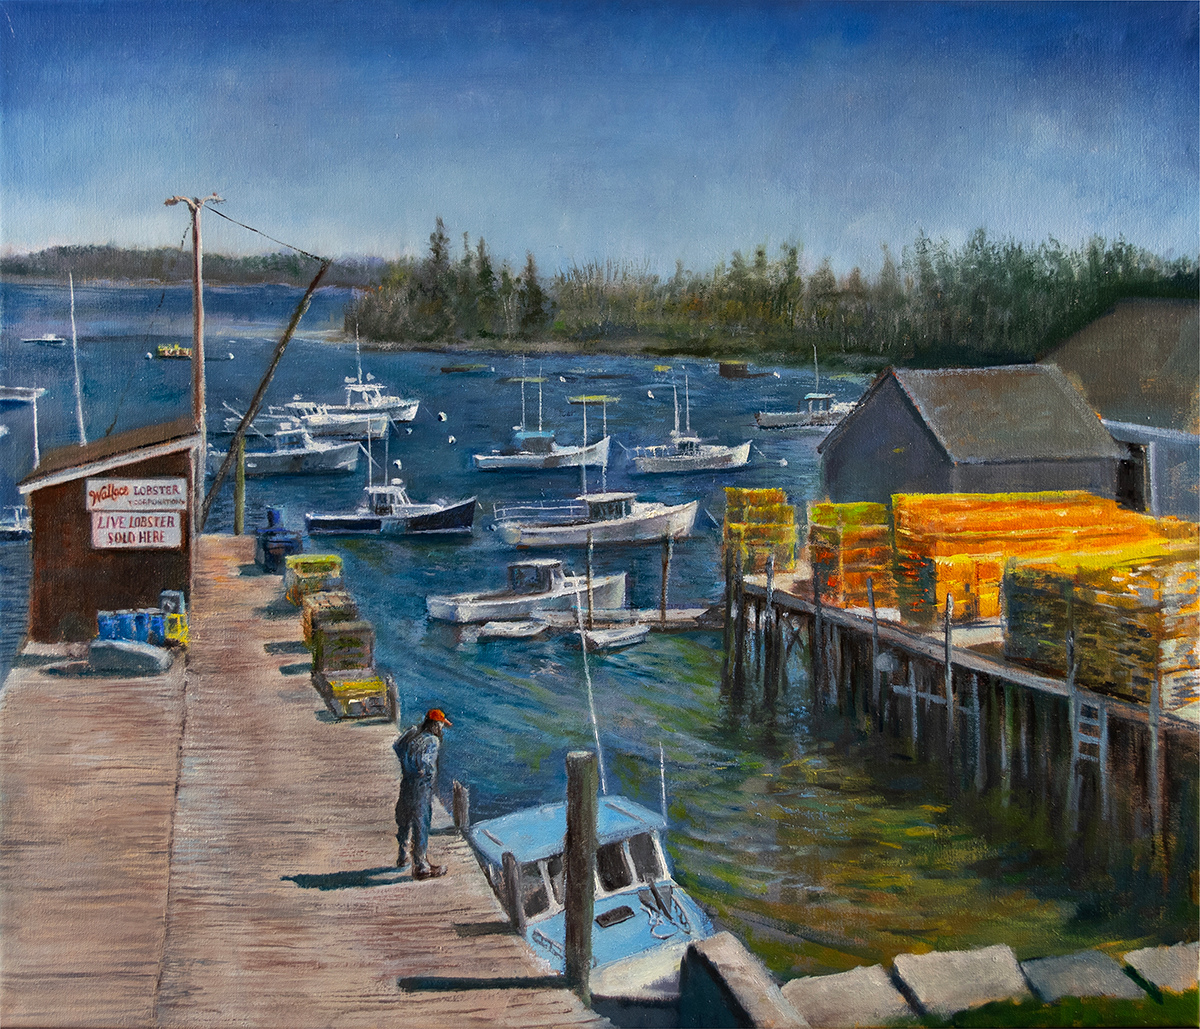 Live Lobster! 3 pm is an oil painting of Wallace Lobster Corporation dock at about 3 pm by artist Elizabeth Reed